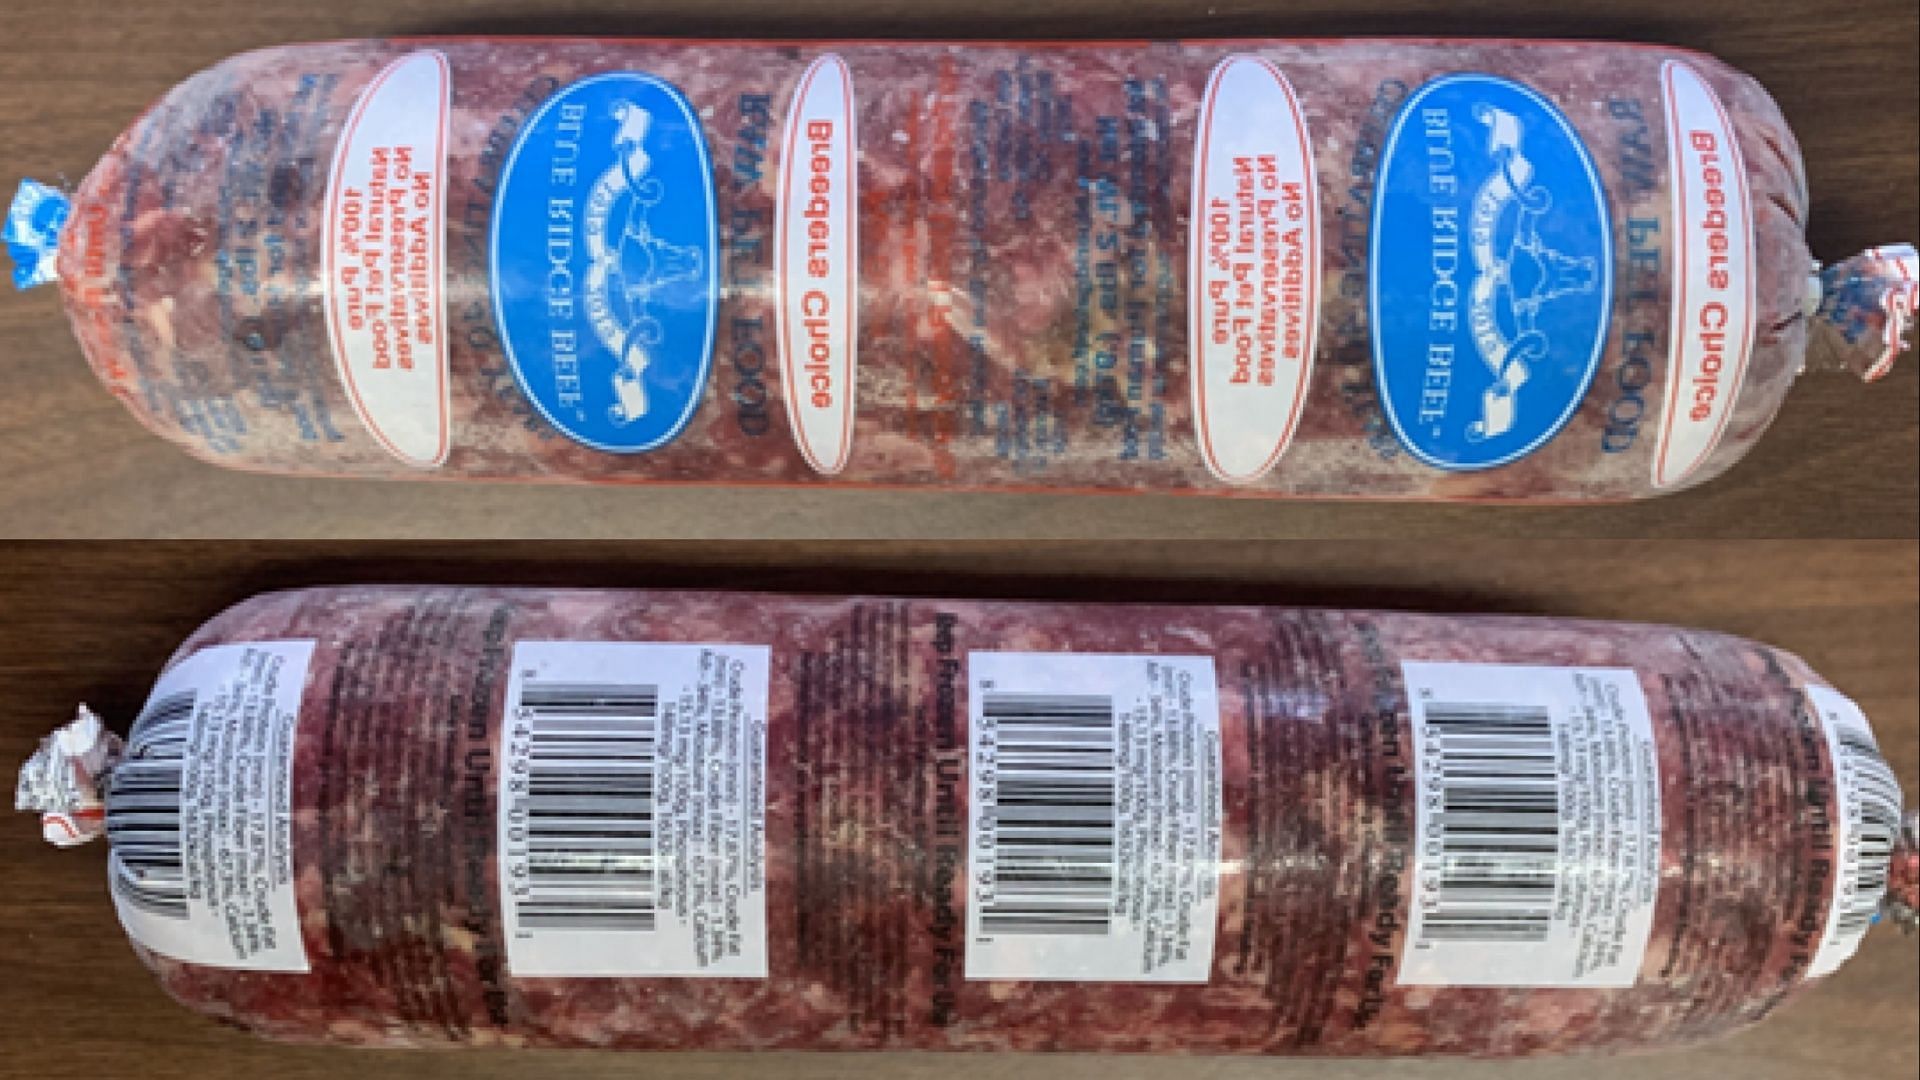 The recalled Blue Ridge Beef Dog Food products should be disposed of safely (Image via FDA)